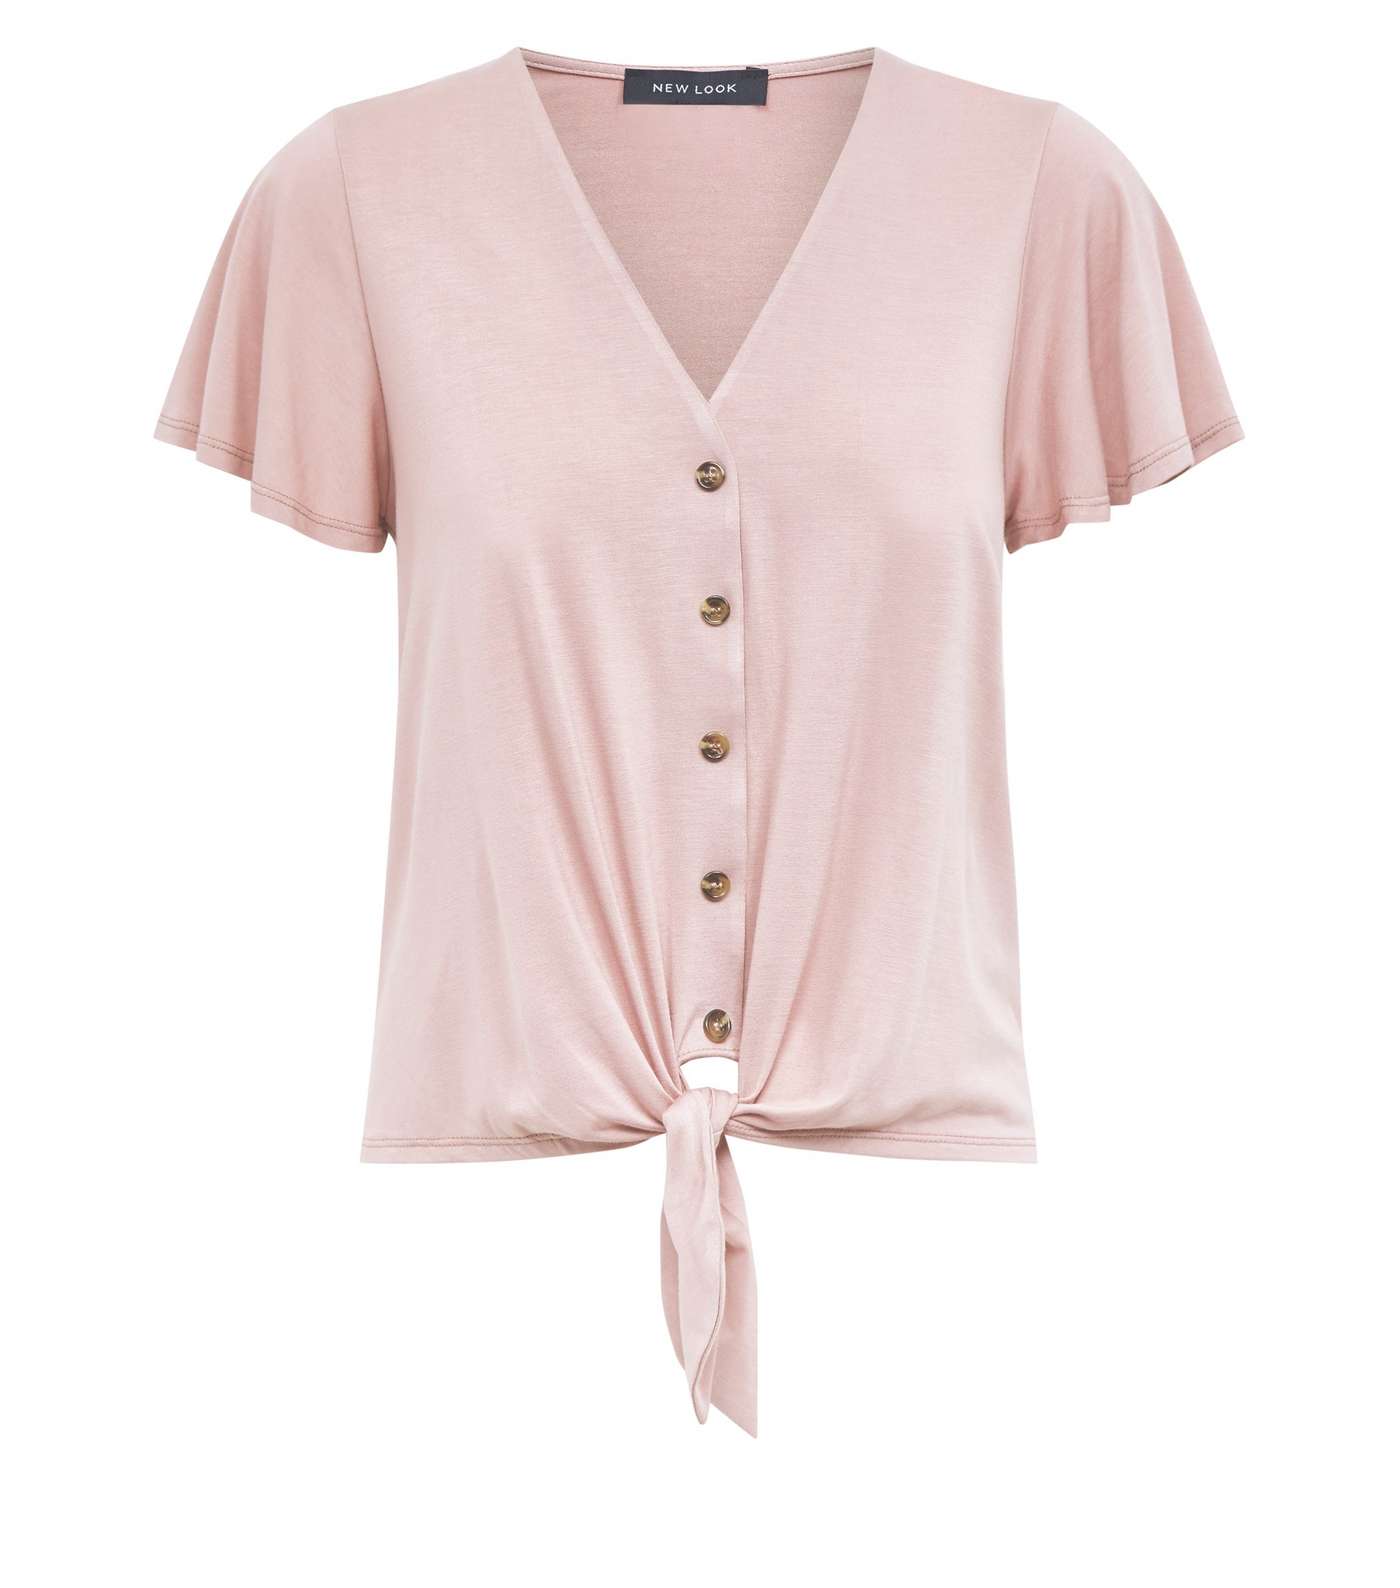 Pale Pink Tie Button Front Top Image 4